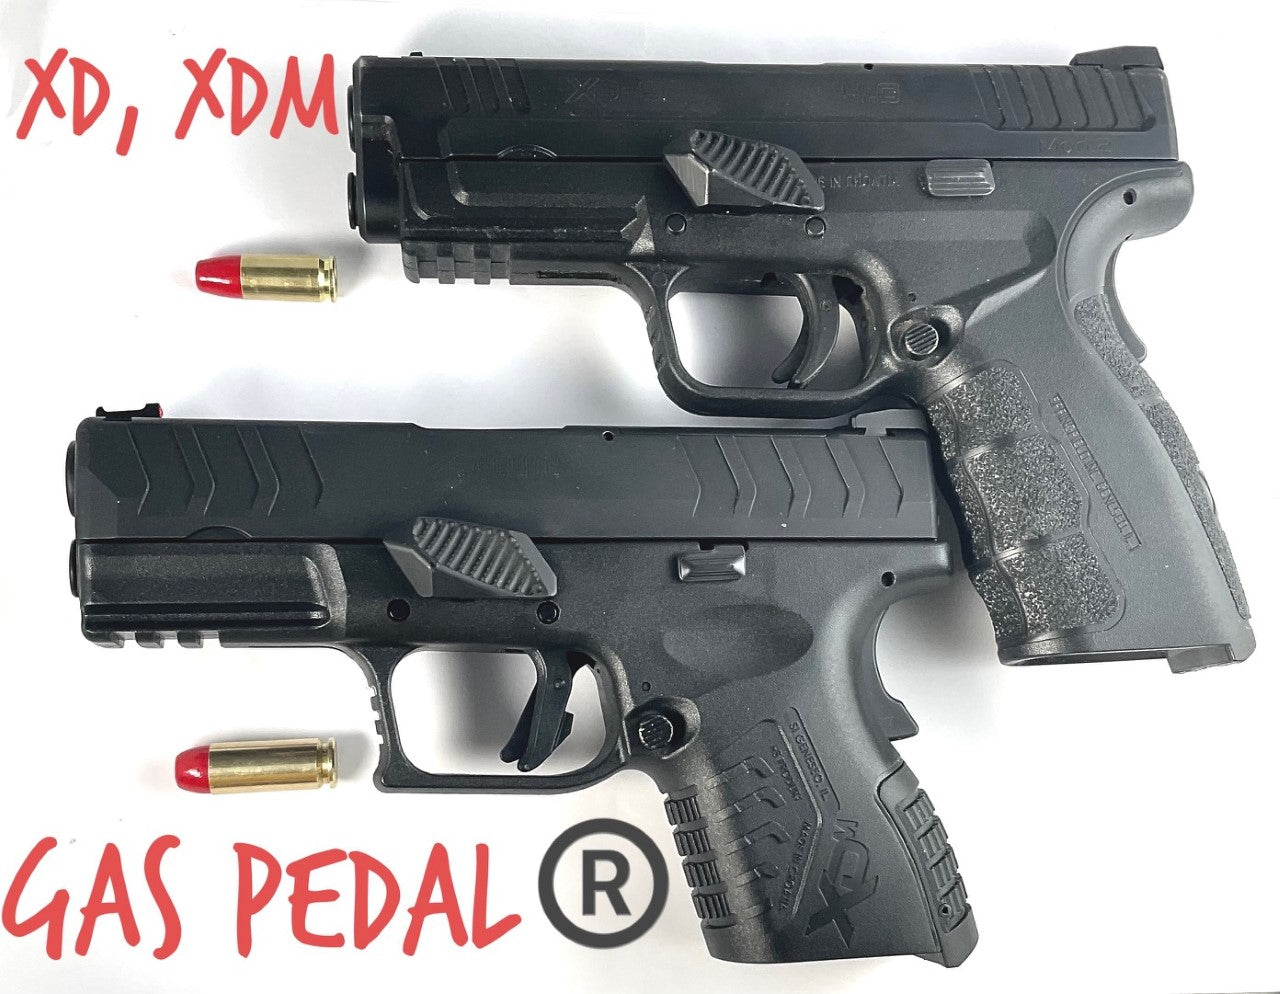 Gas Pedal ® CGSpringfield XD and XDM, 9mm, 10mm